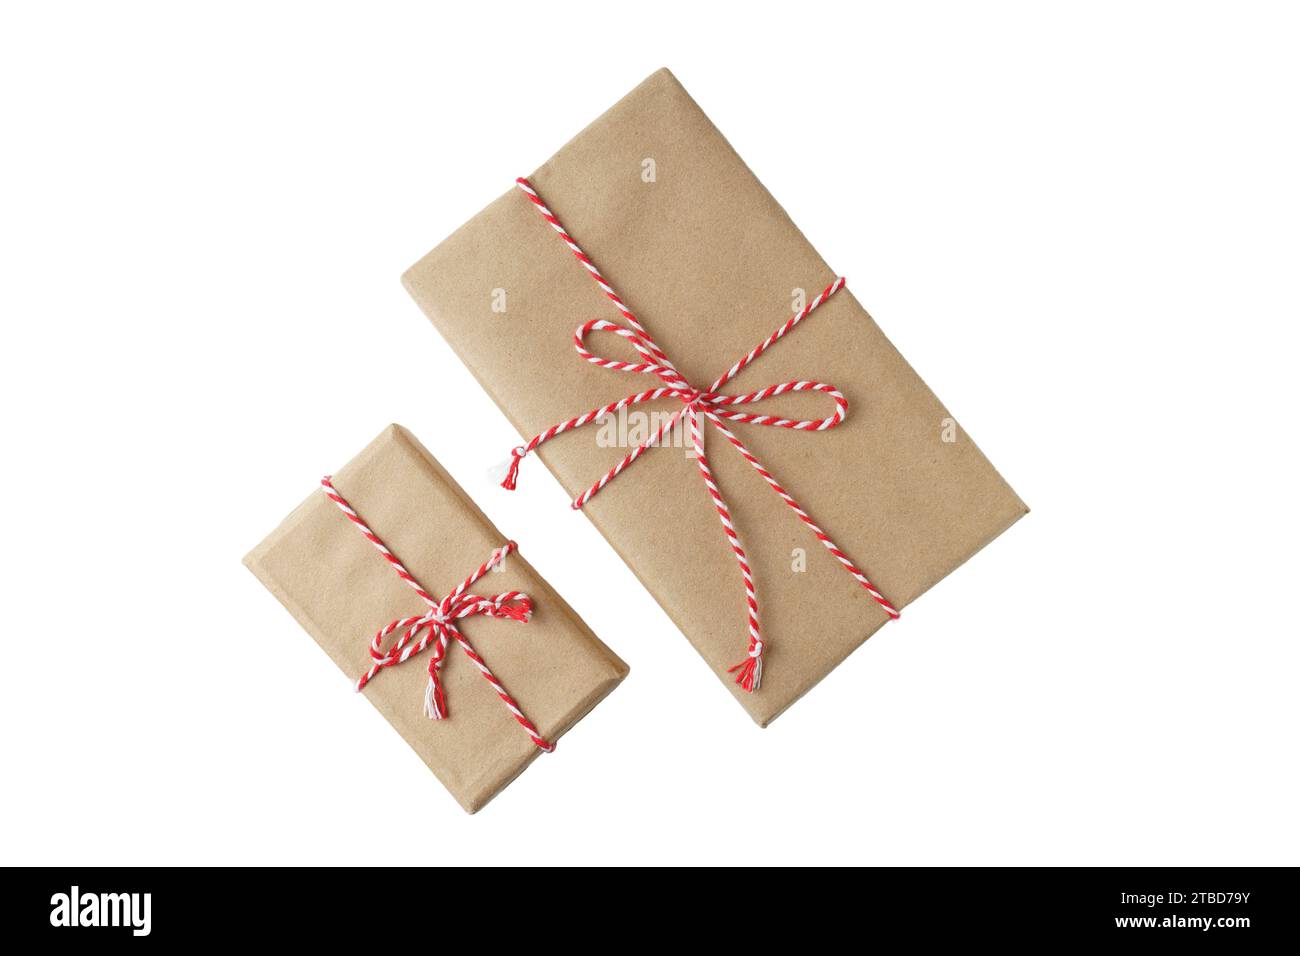 Gift box Wrapped in Brown Recycled Paper with White Ribbon Bow Top View  with Fir Branches. Christmas Concept. Close Up. Stock Photo